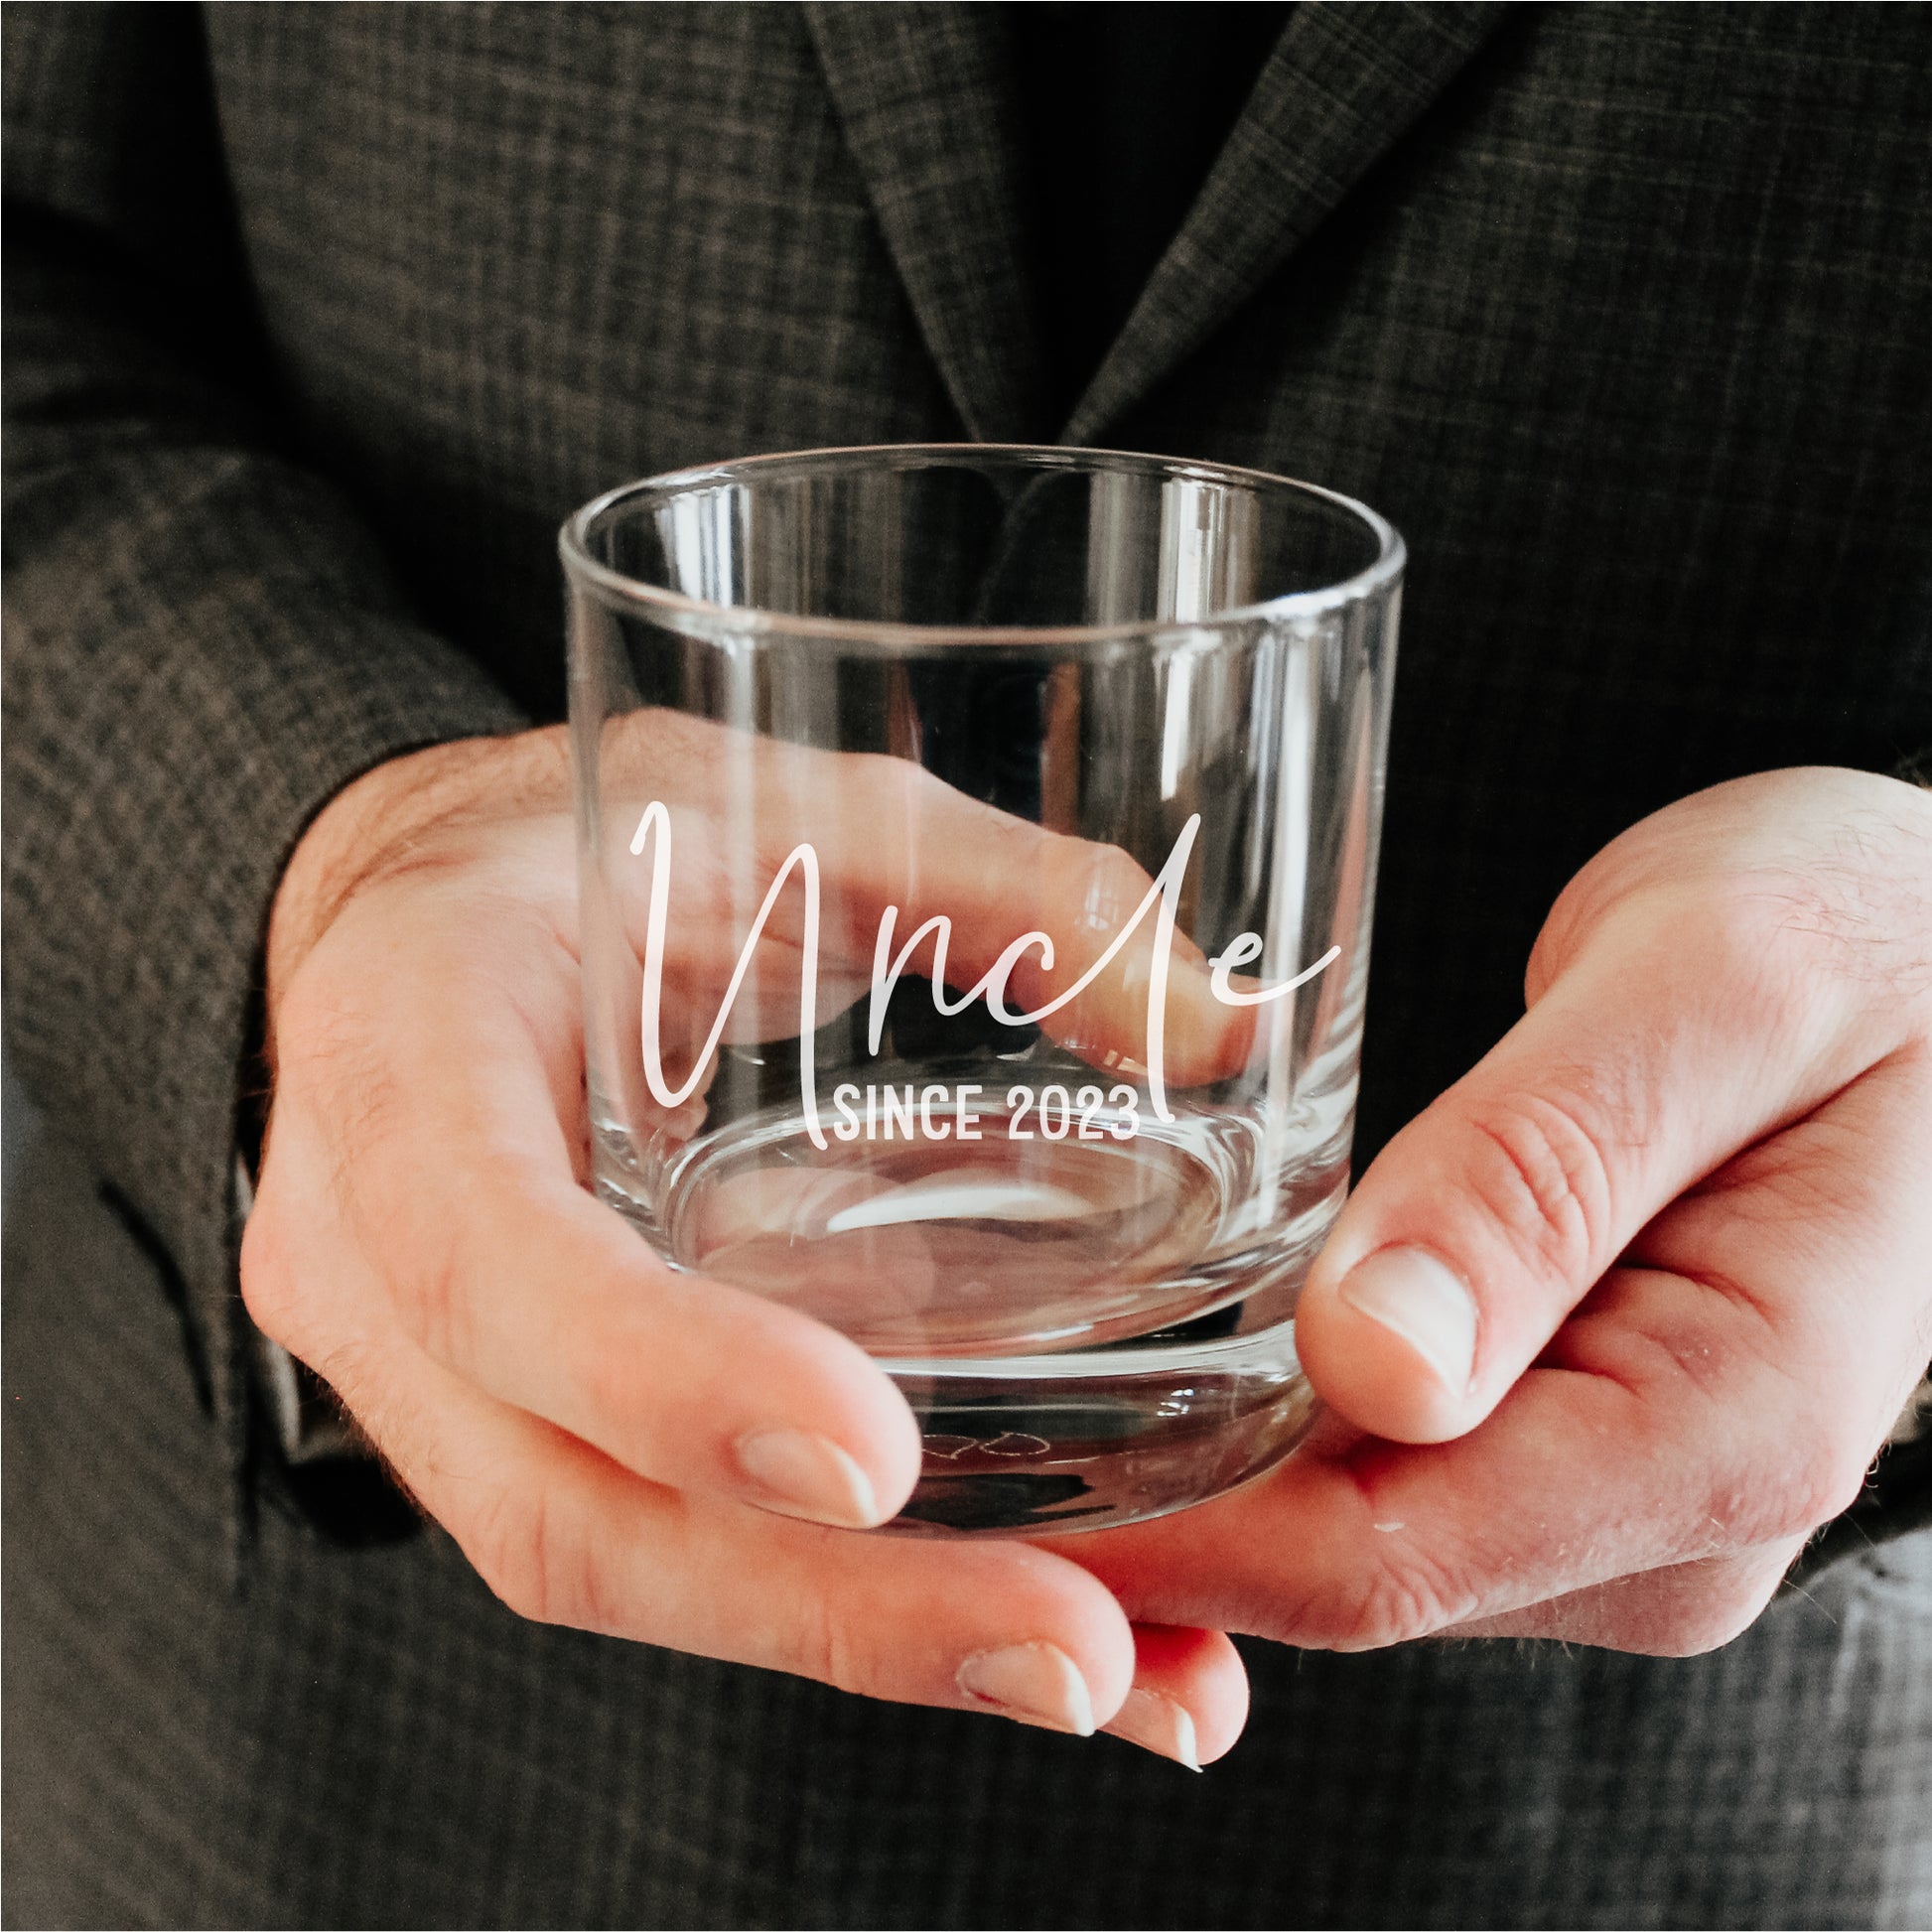 man holding a whisky glass engraved with the words Uncle since 2023